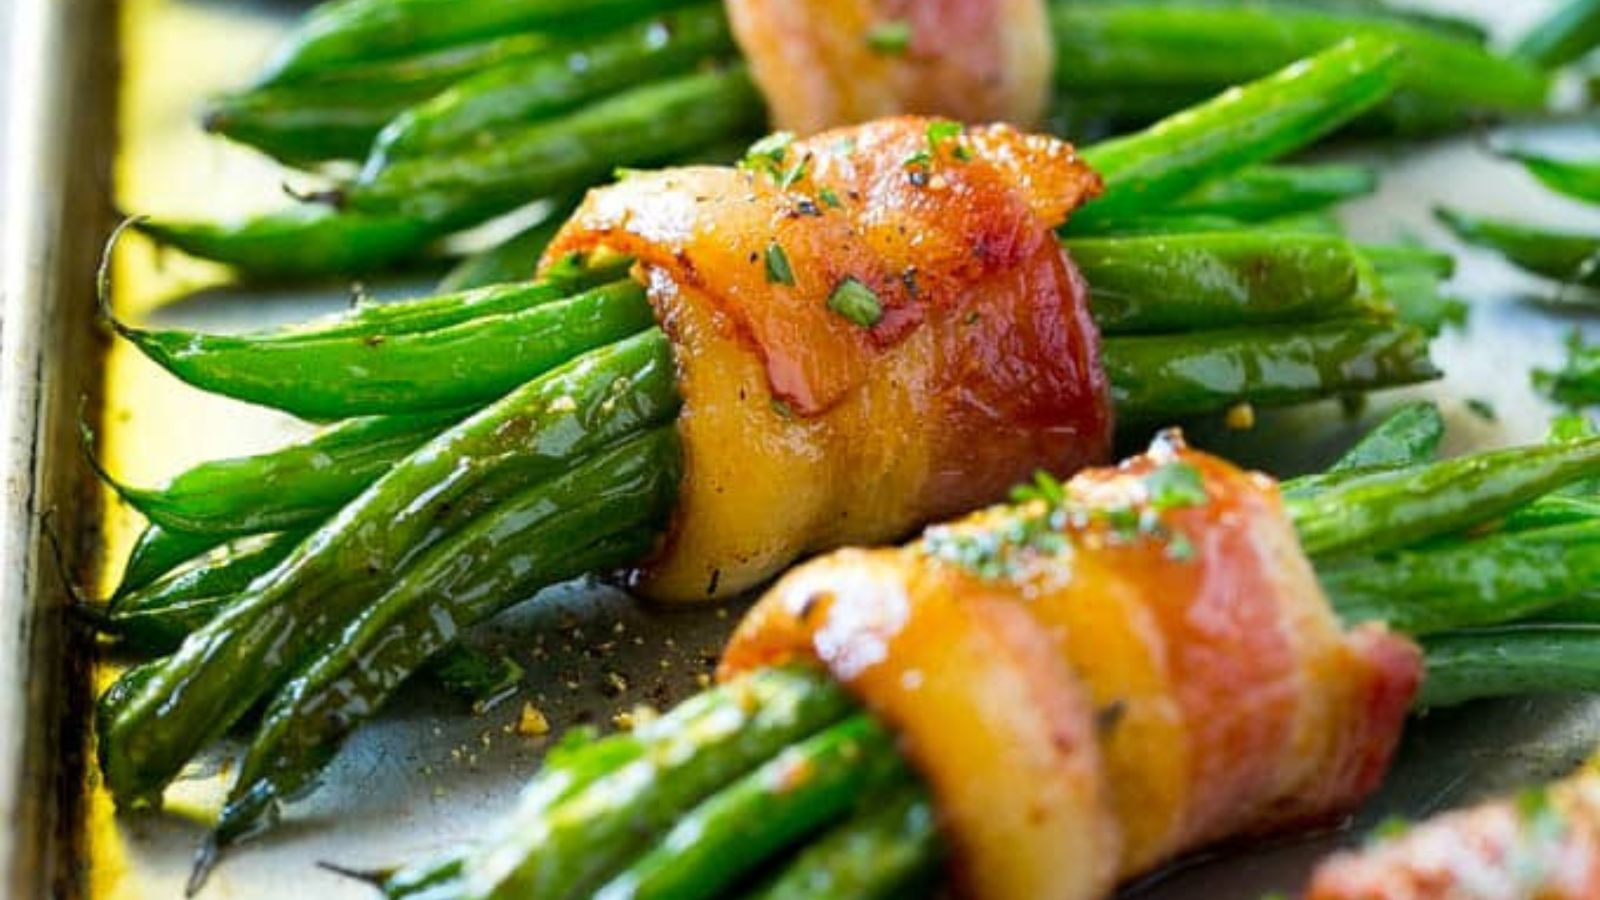 26 Thanksgiving Side Dishes You’ll Want to Repeat Every Year